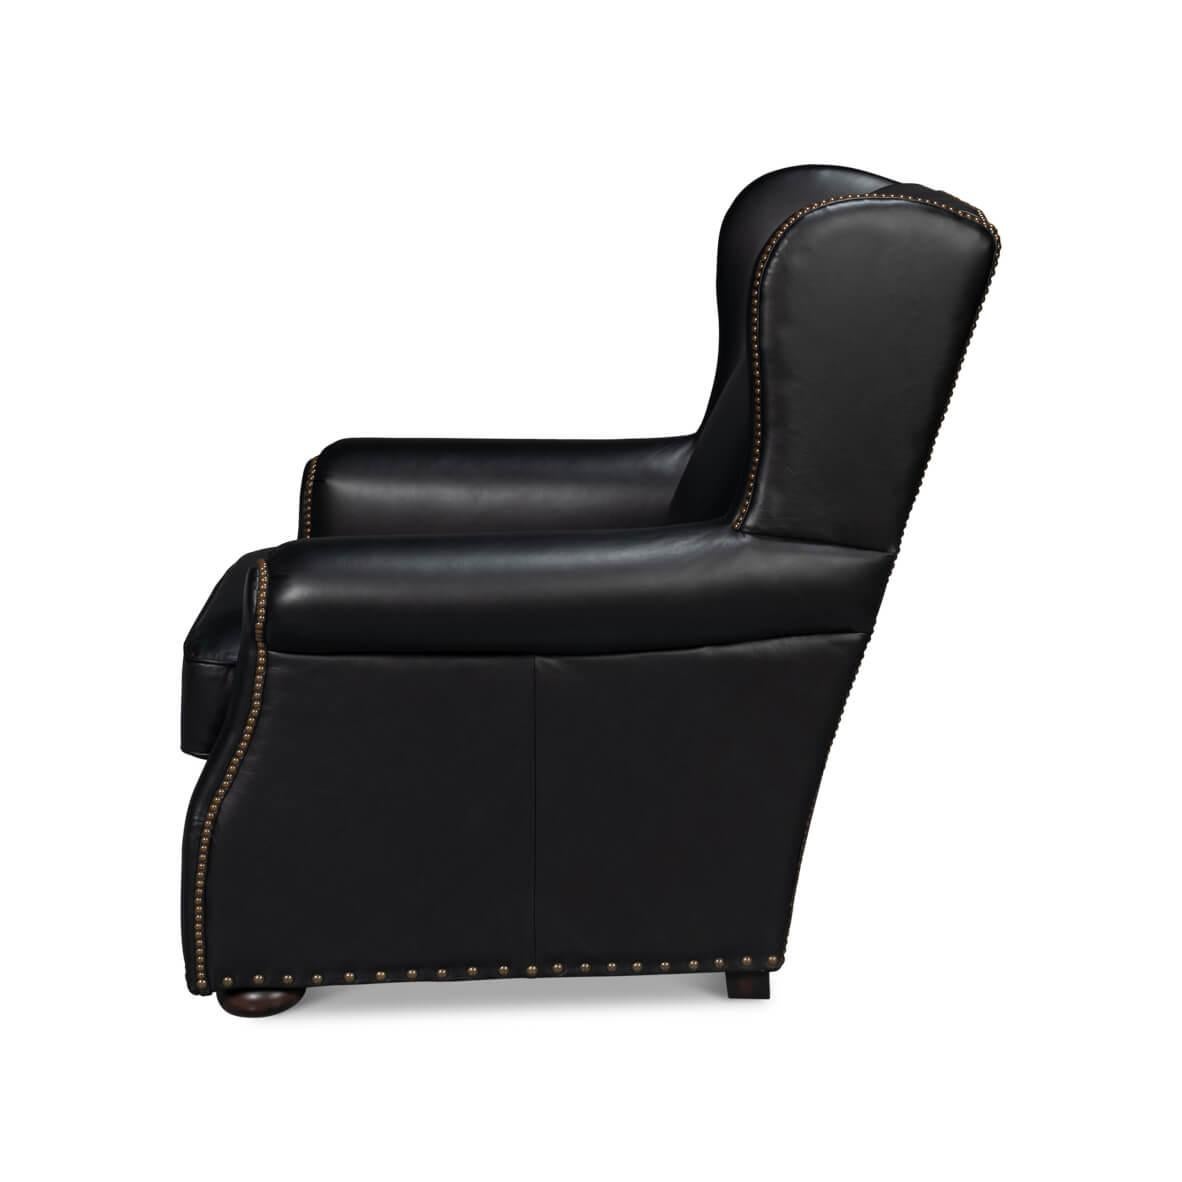 Featuring a high back design for ultimate support and rolled arms with intricate pleating detail, inviting you to a world of comfort with just one look. Wrapped in Onyx Black leather, its deep color is the epitome of luxury, bound to add a touch of